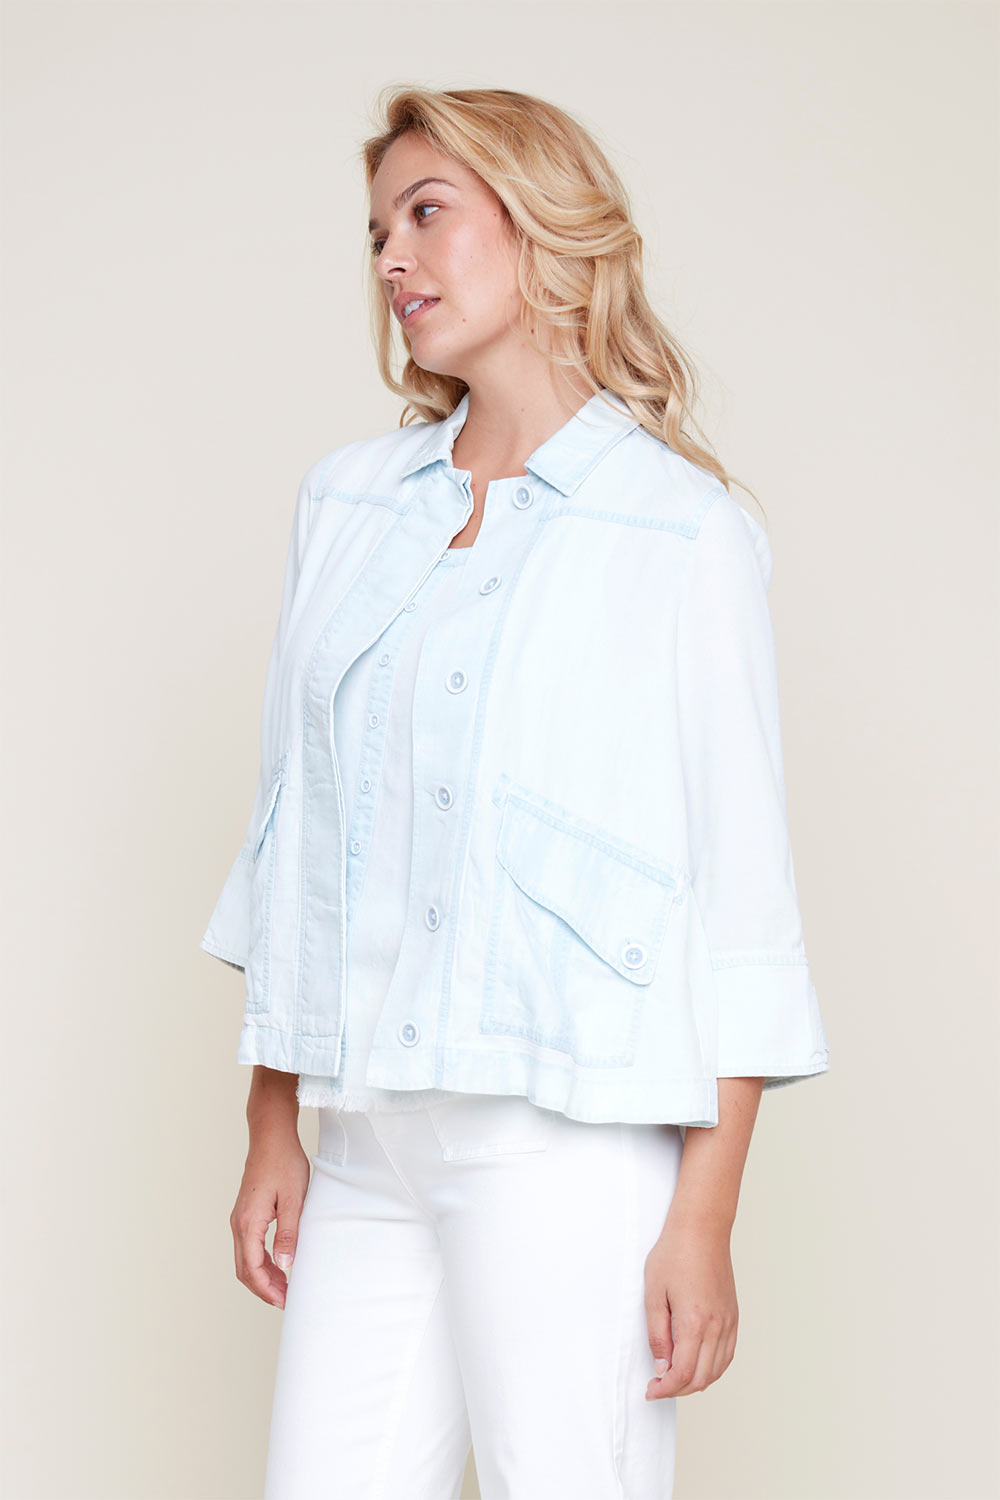 Renuar (R3806-E2142) Women's 3/4 Sleeve Button Front Tencel Jacket with Shirt Collar in Bleached Wash Blue